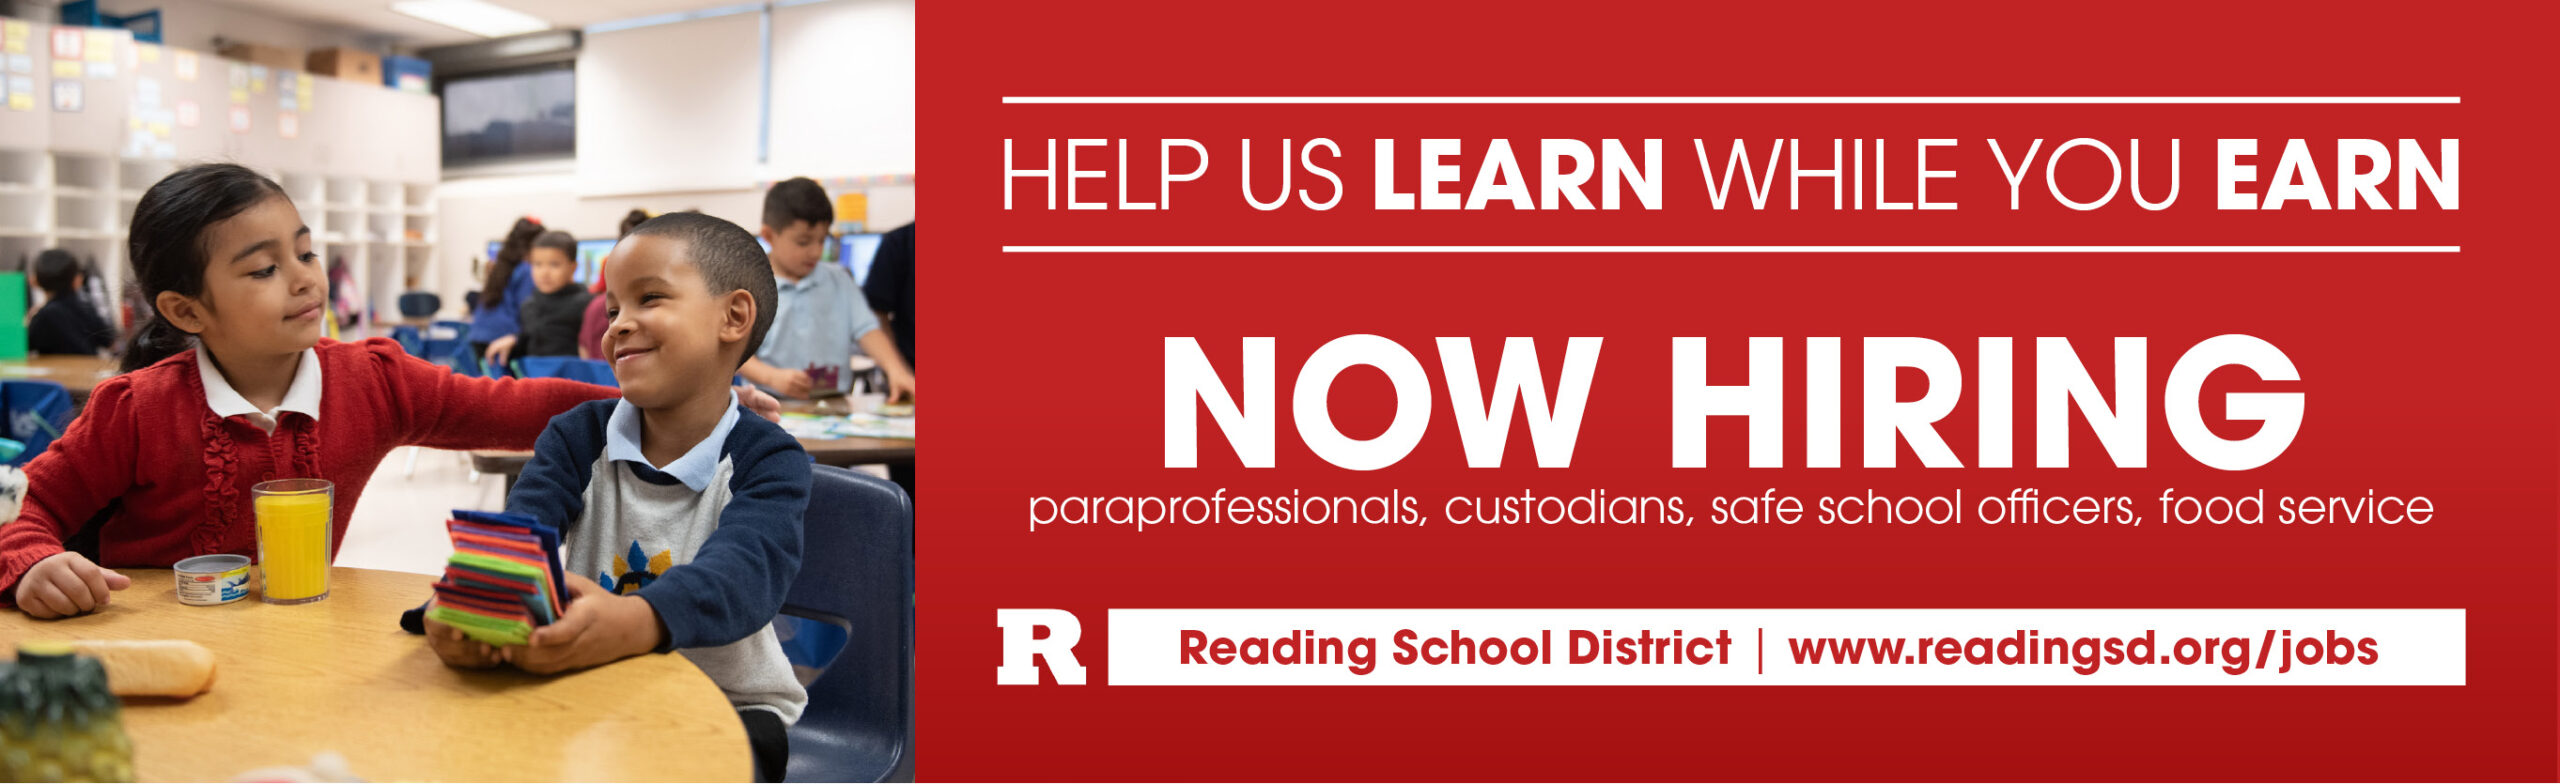 A digital banner or ad for Reading School District, showcasing students. Text reads "Help us learn while you earn!"